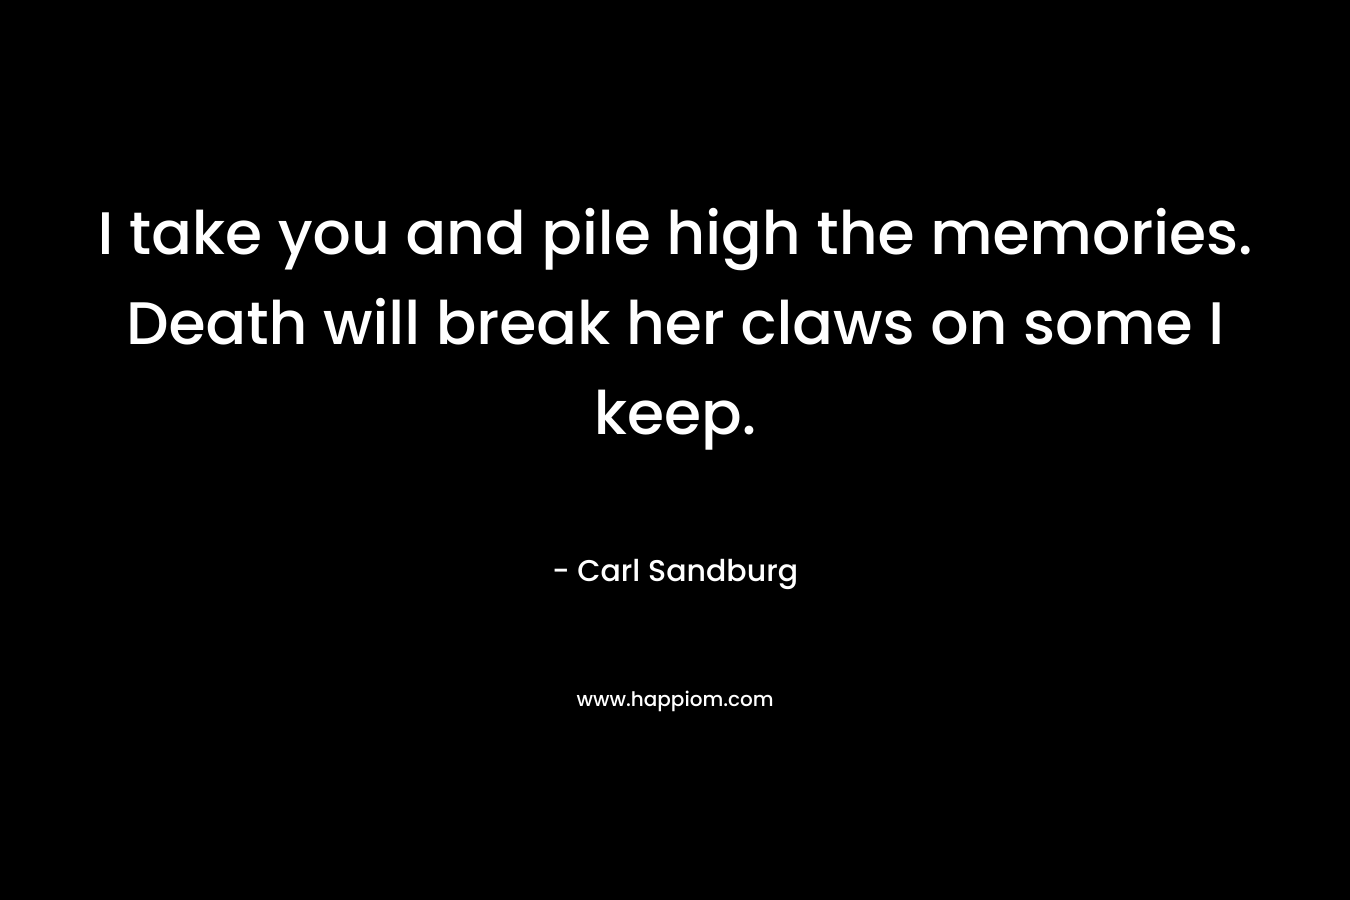 I take you and pile high the memories. Death will break her claws on some I keep. – Carl Sandburg